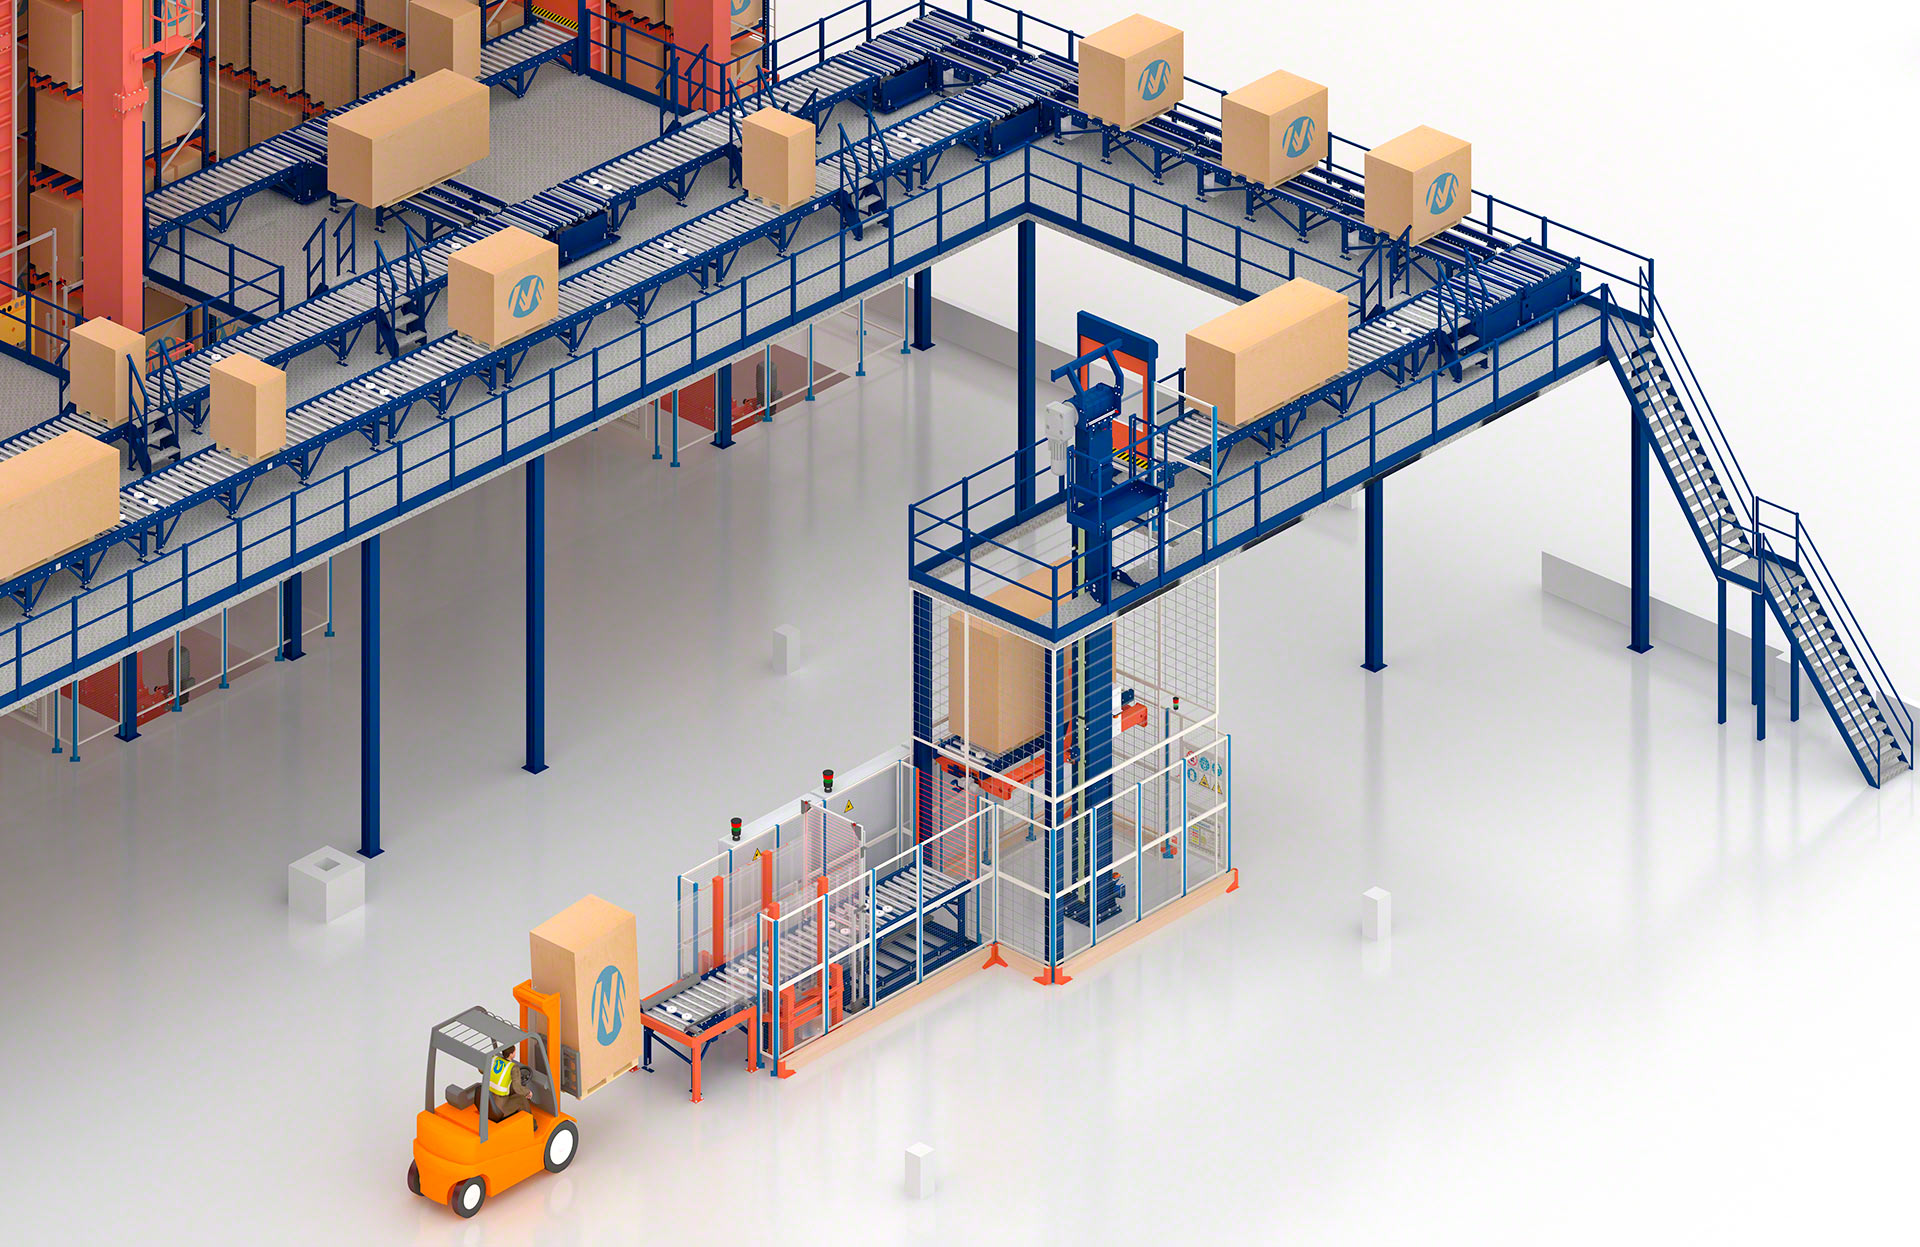 Safety fencing restricts access to the operational area of pallet elevators